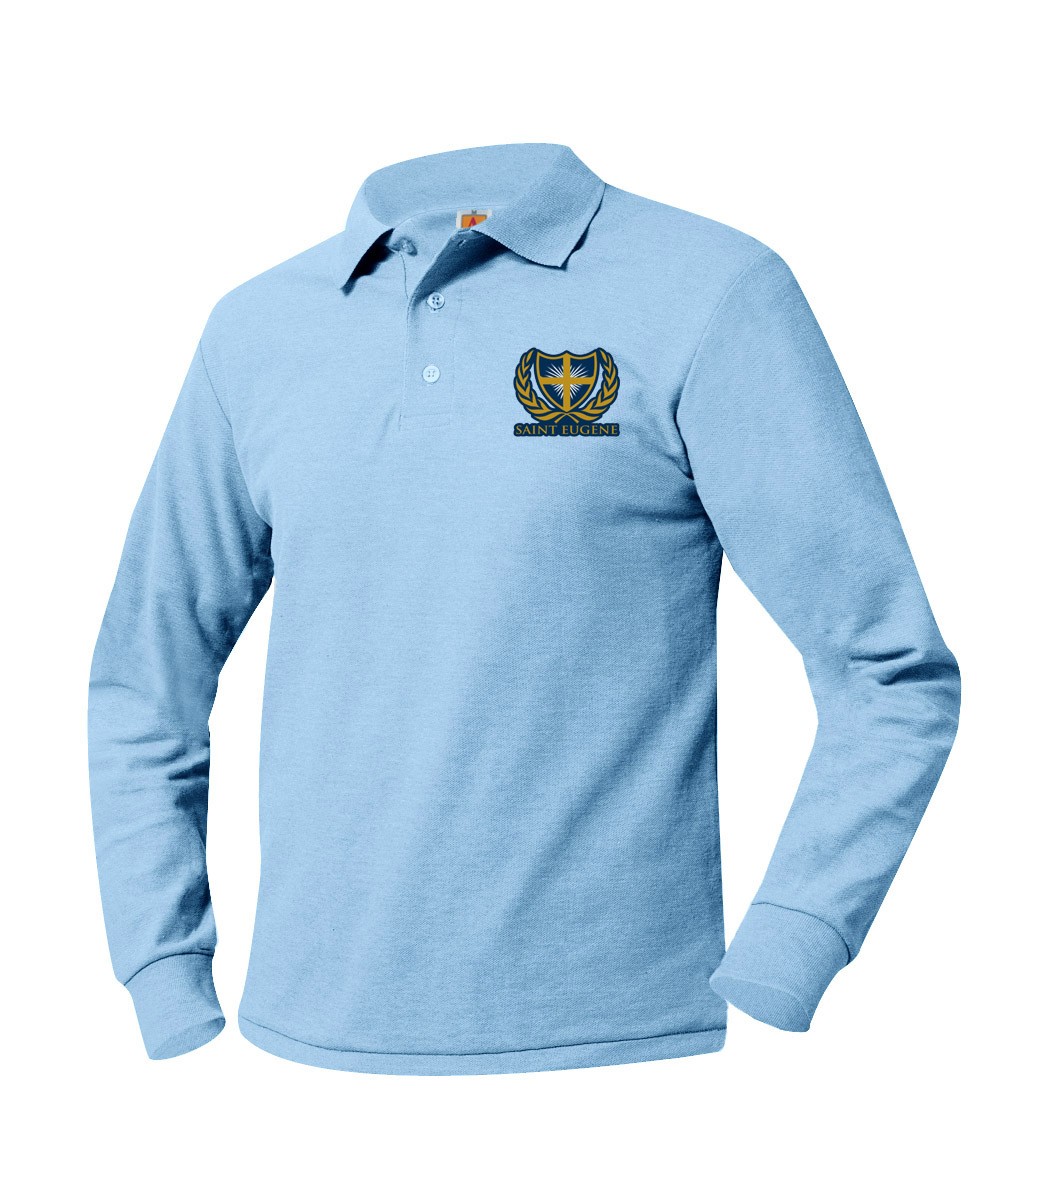 SES Staff Light Blue L/S Polo w/Logo - Please Allow 2-3 Weeks for Delivery